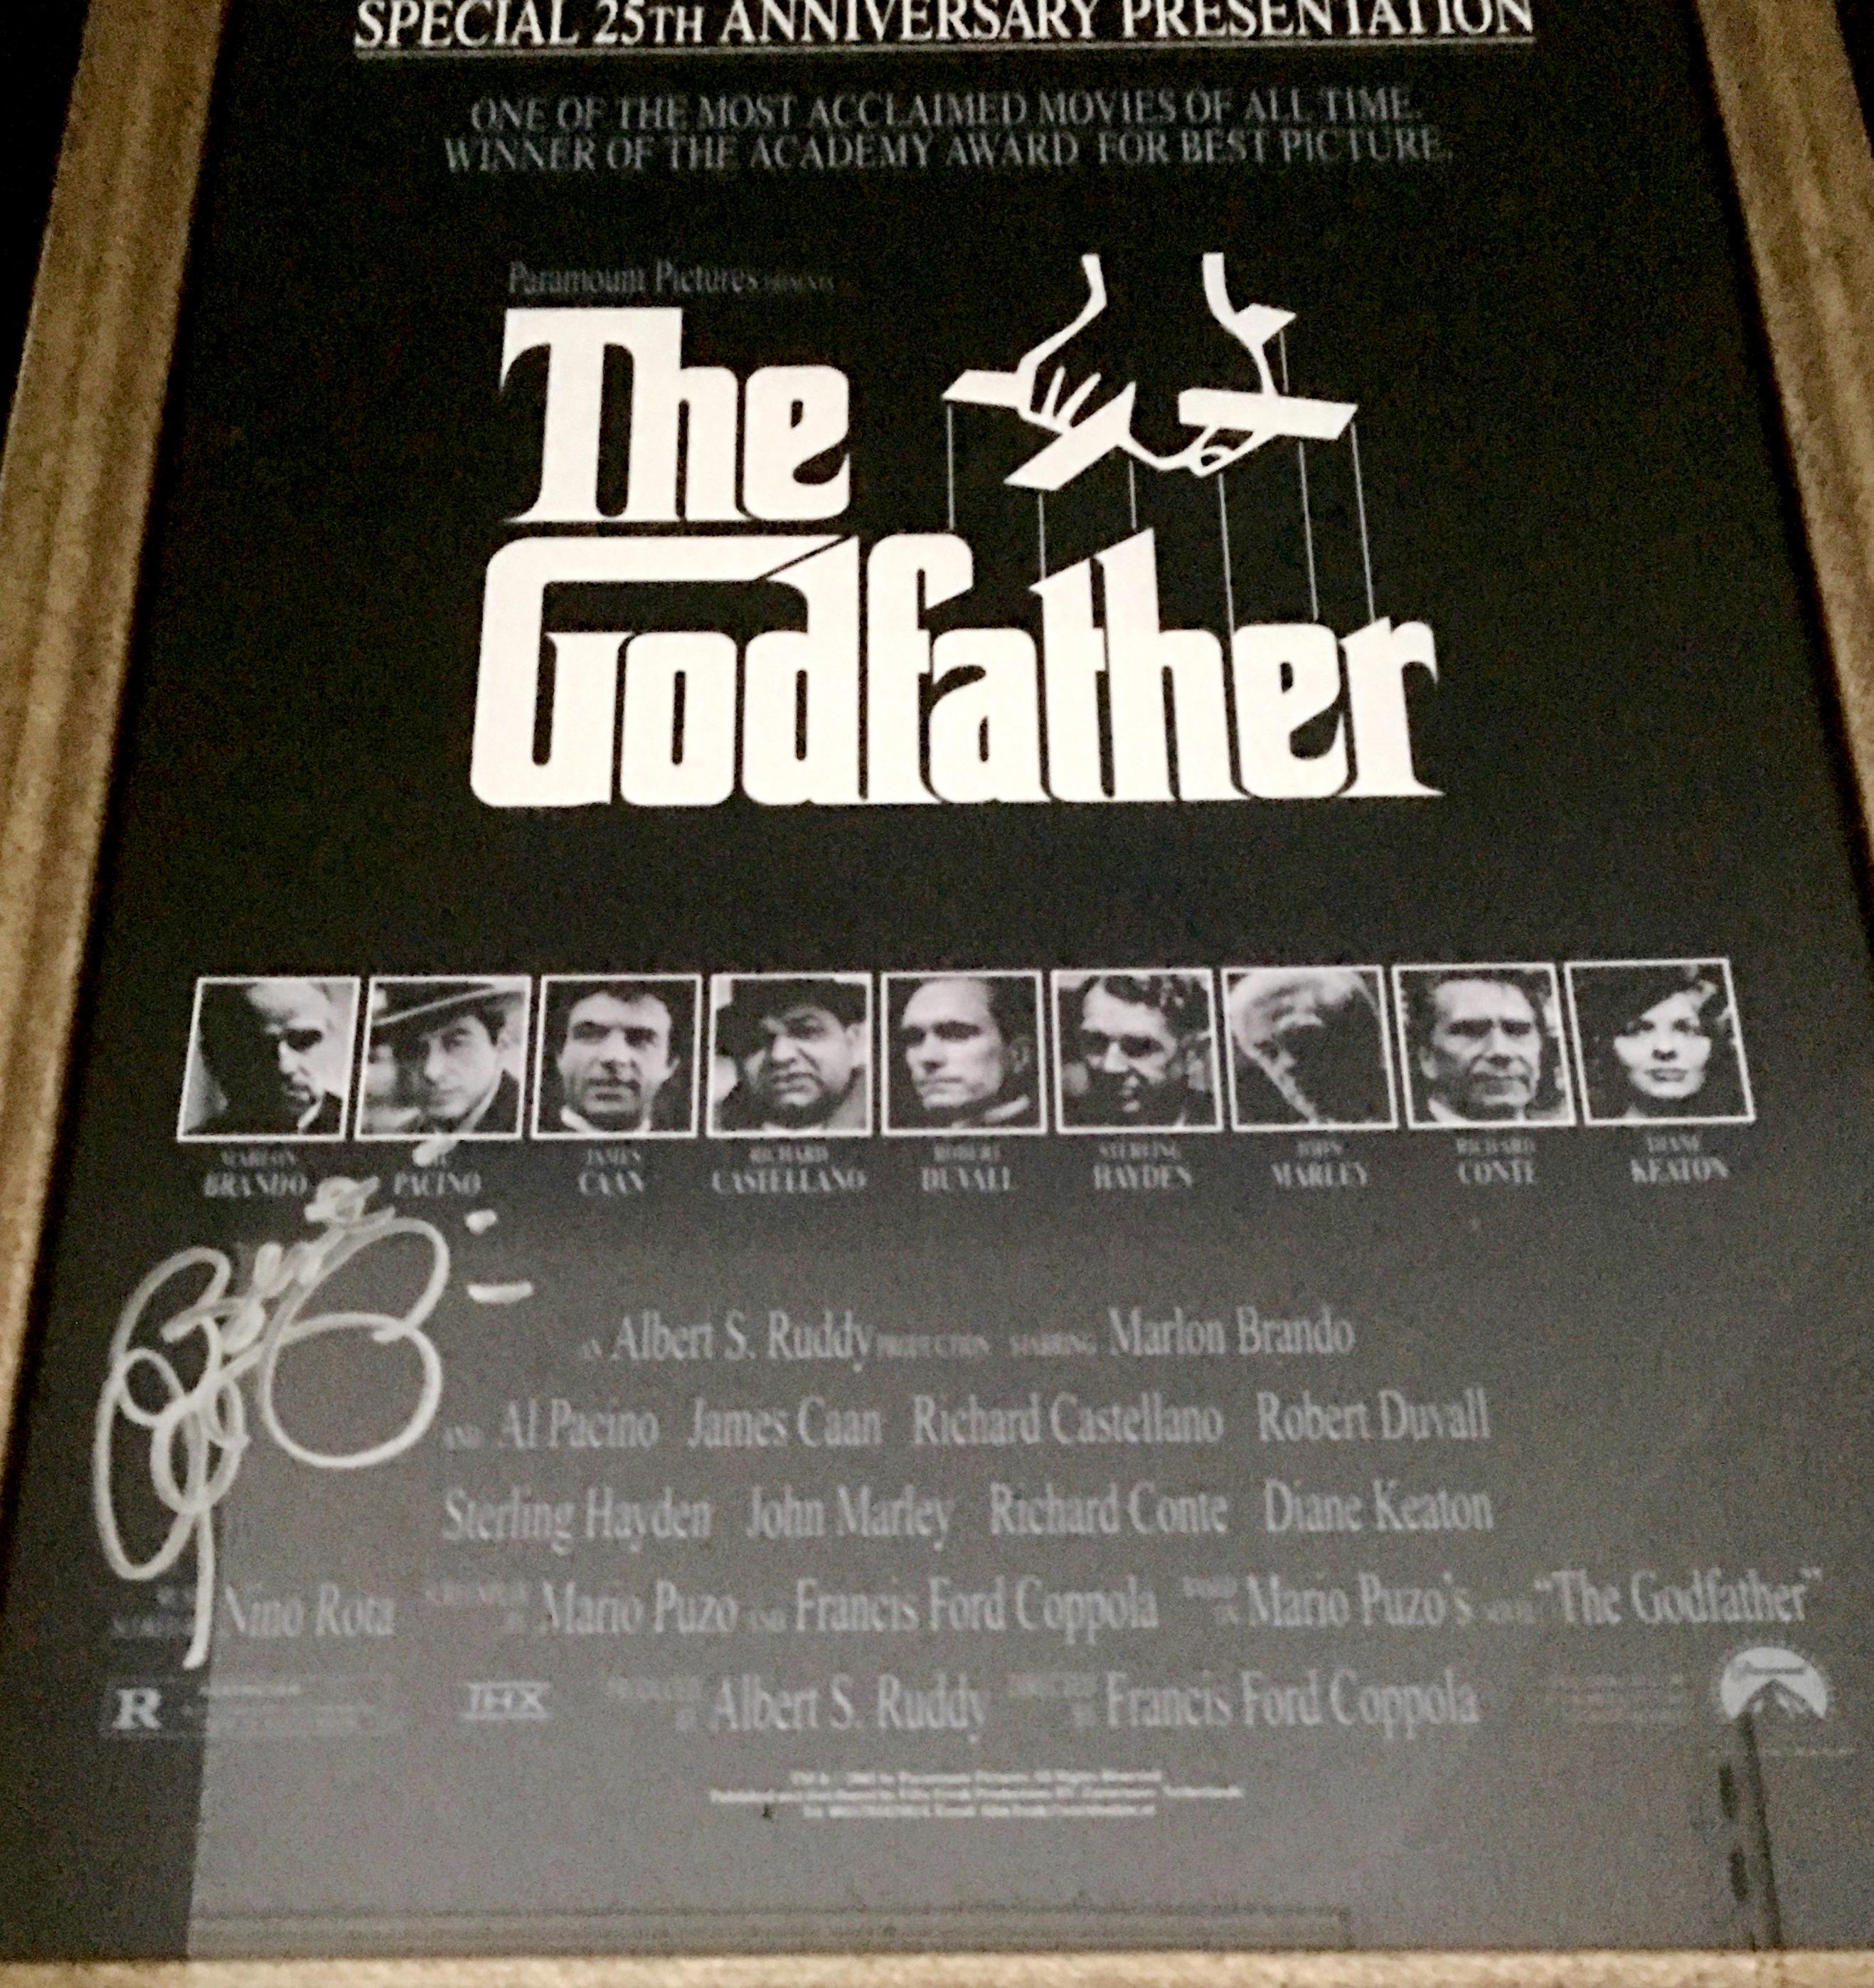 godfather 25th anniversary poster